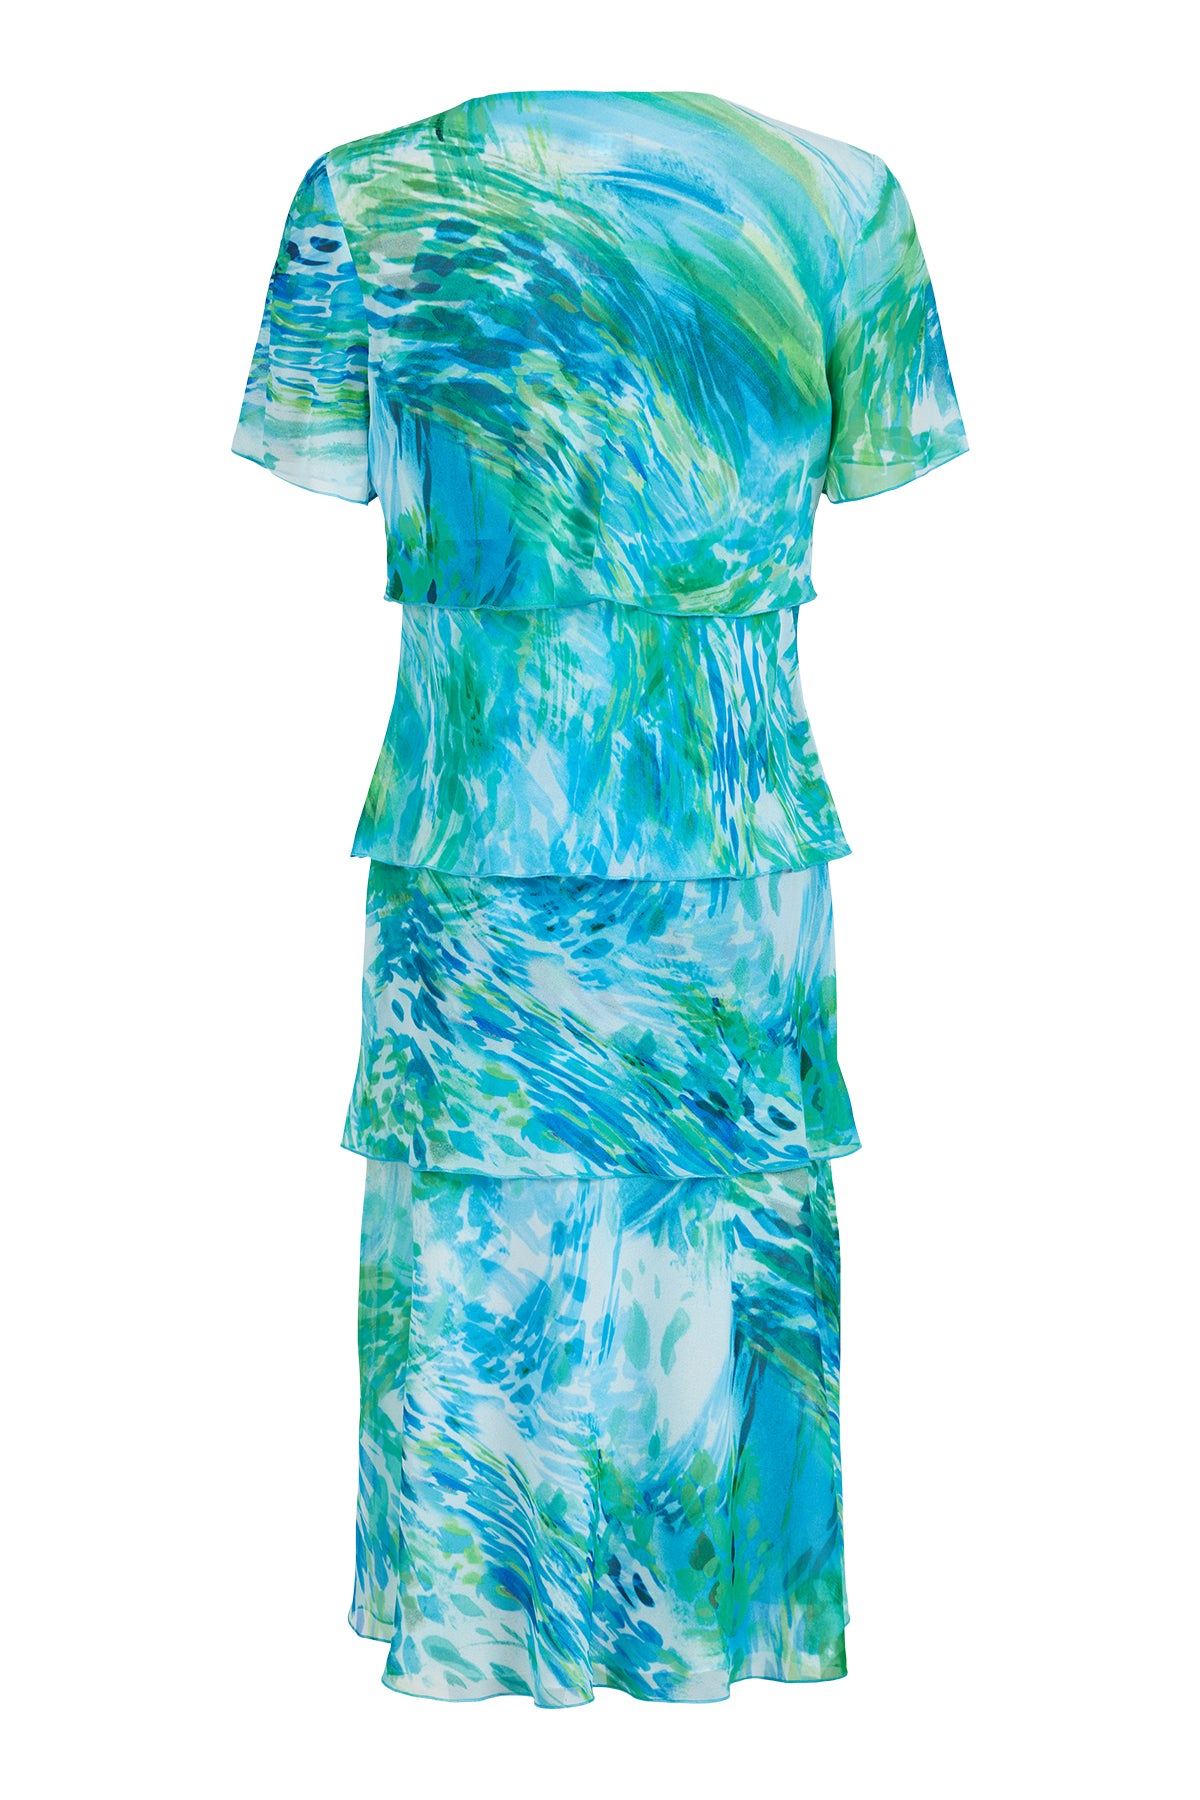 Green/Blue Abstract Print Dress with Layered Effect and Short Sleeves